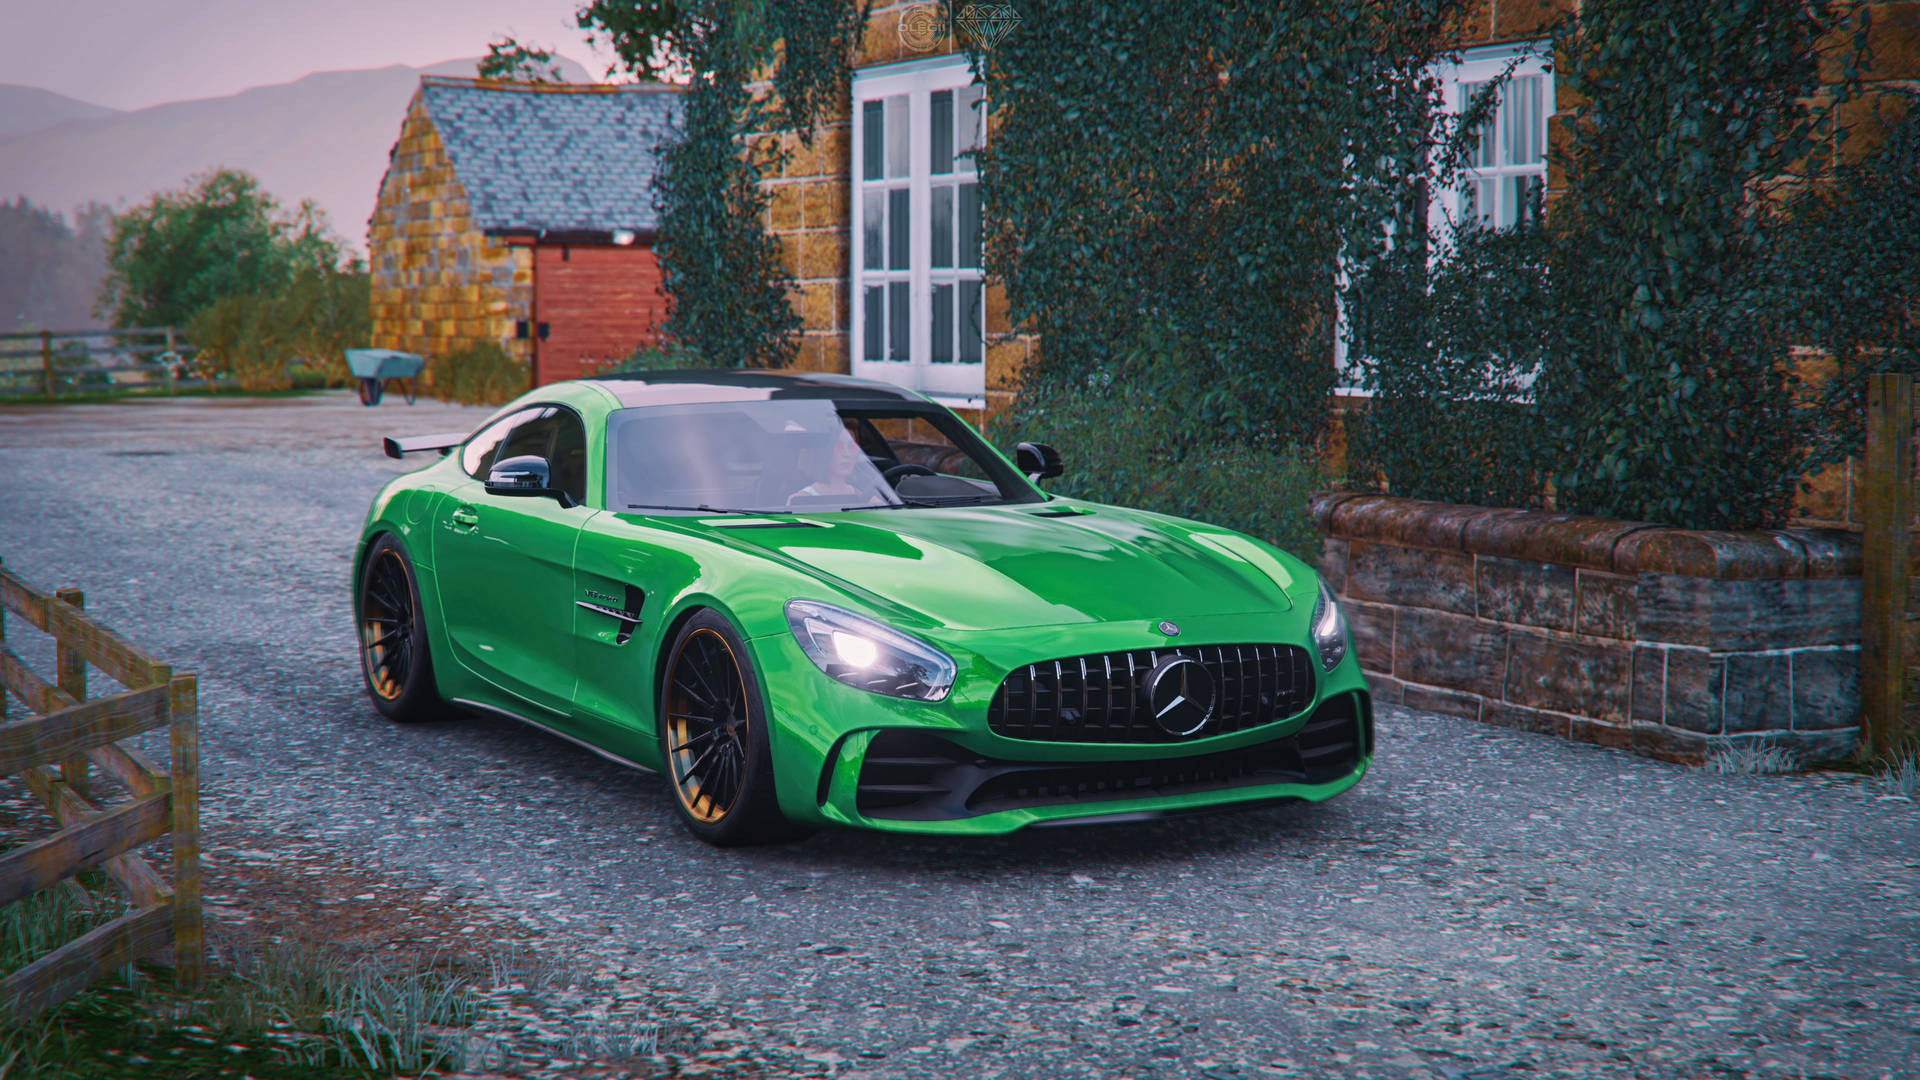 Caption: Exceptional Performance - Mercedes Amg In Forza Horizon 4 Background